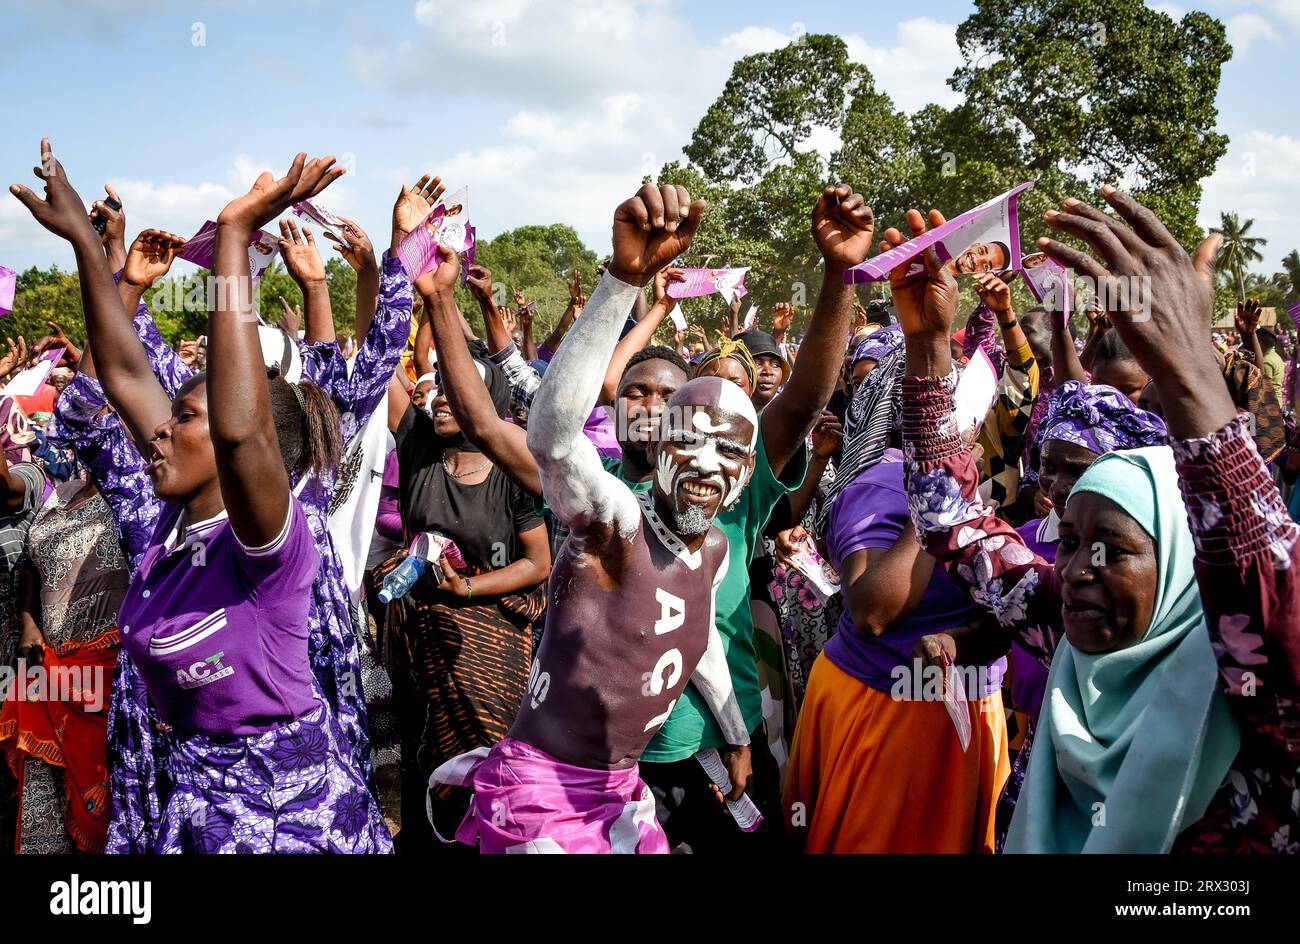 Supporters of Tanzania's opposition party, ACT Wazalendo sing and dance during the party's political rally in Tandahimba district, Mtwara region on Ma Stock Photo